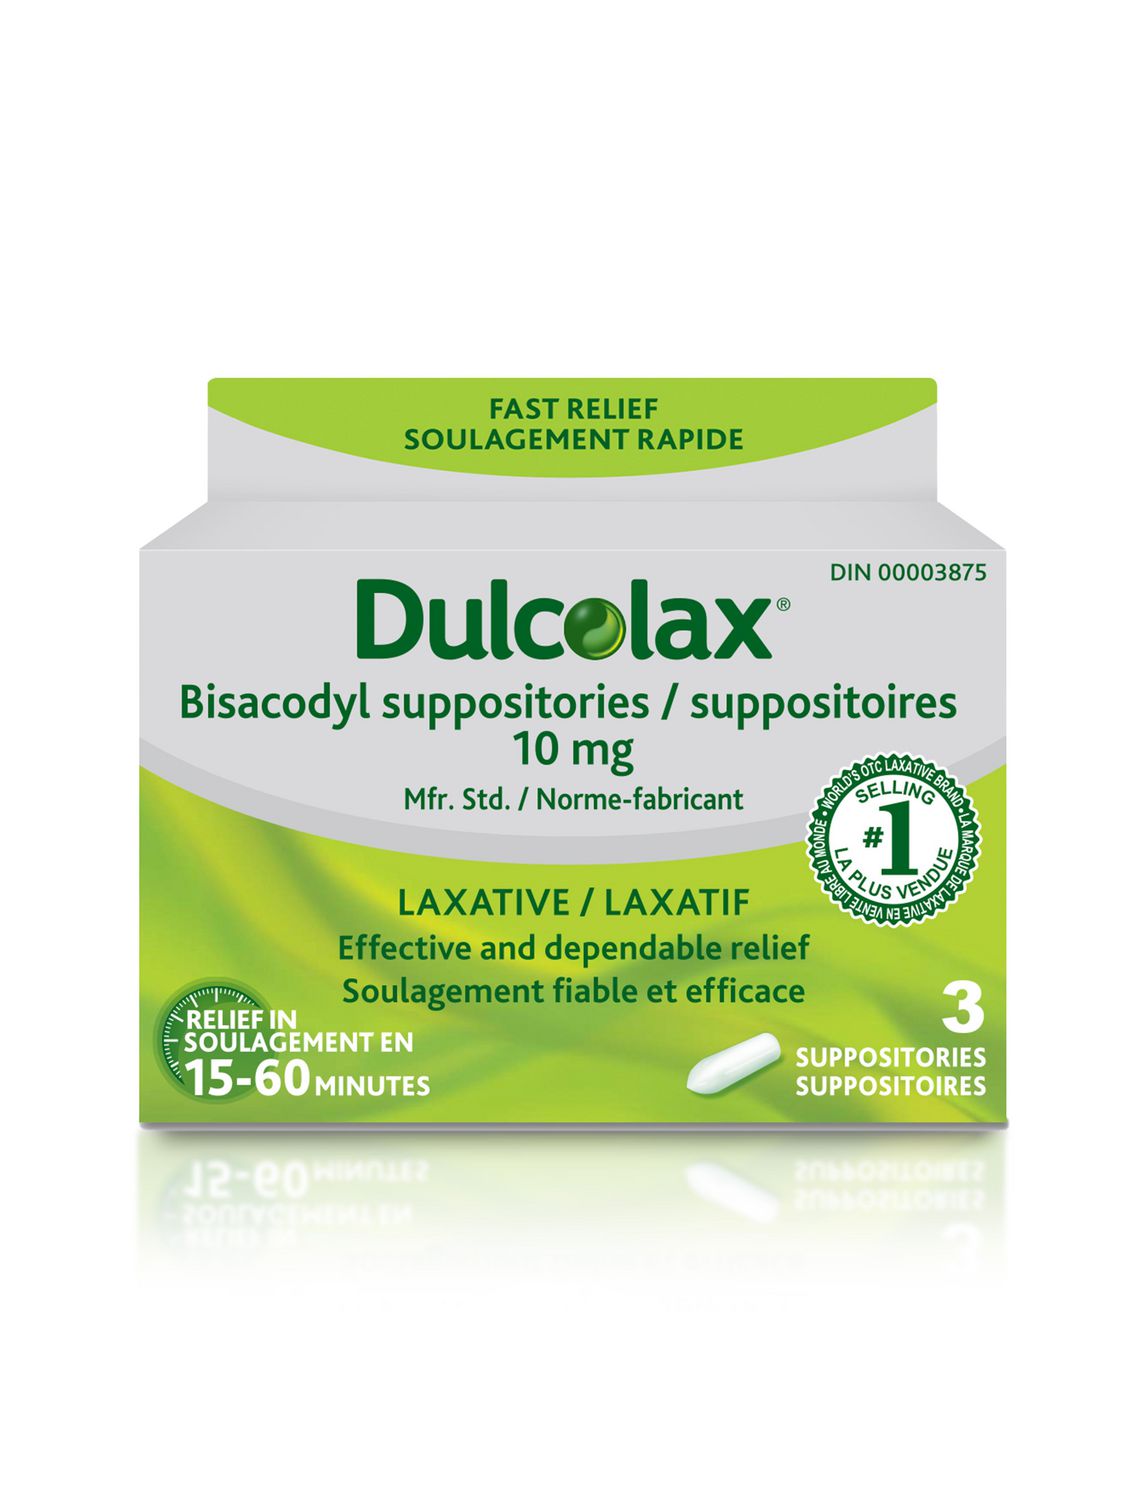 Major Bisacodyl Laxative 10mg, 100ct Suppositories on Galleon Philippines